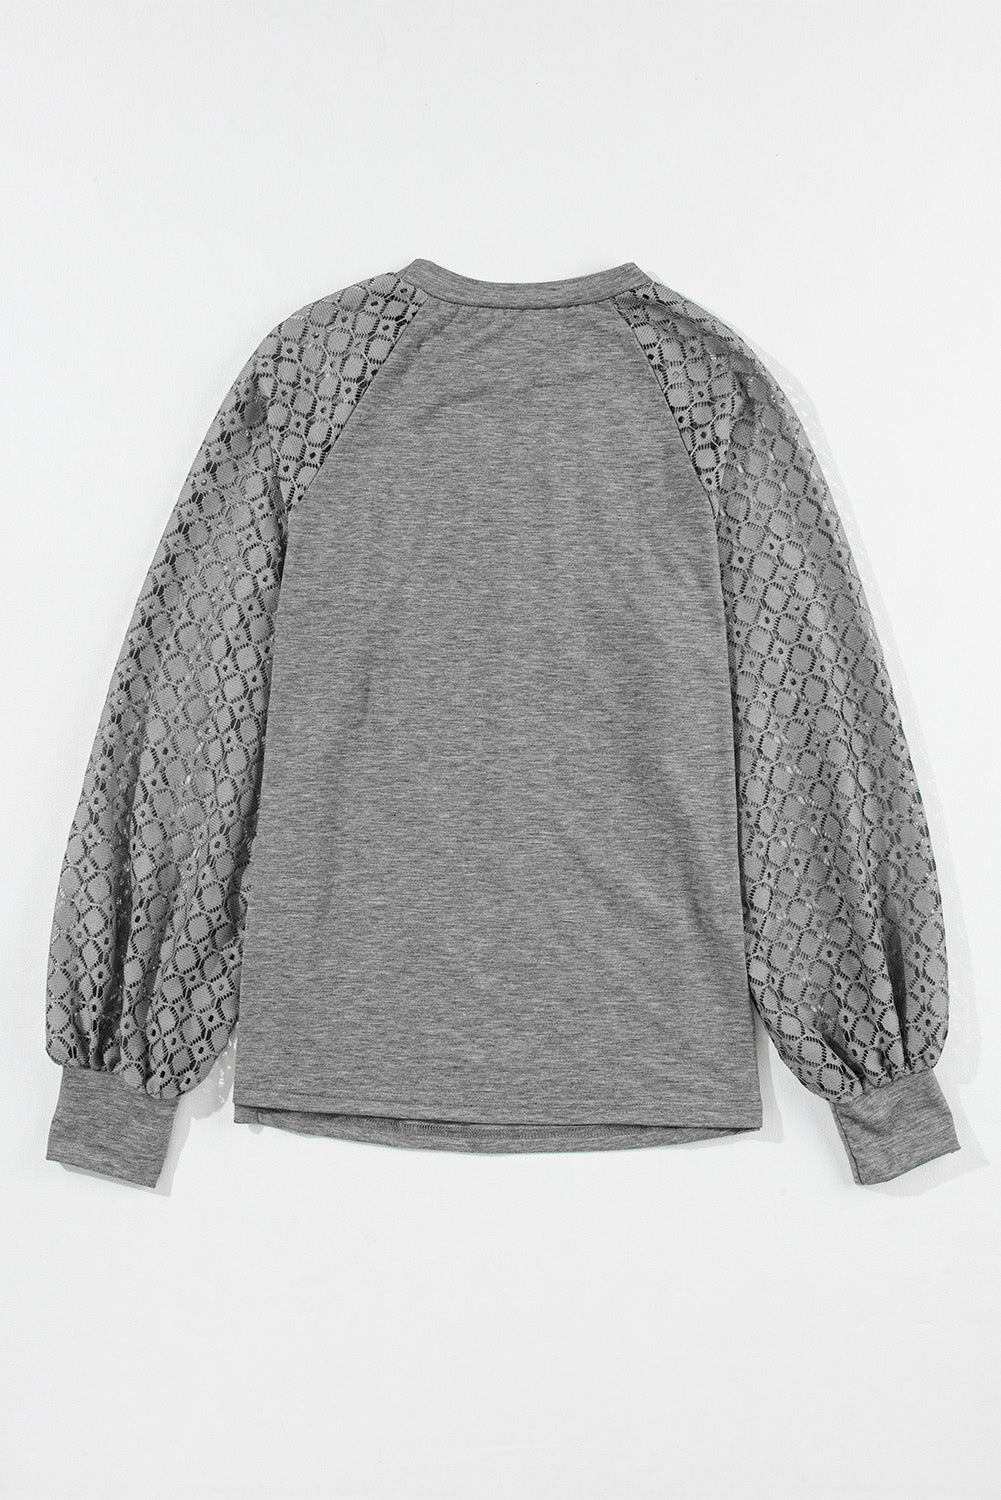 Gray Contrast Lace Raglan Sleeve Plicated Knit Top